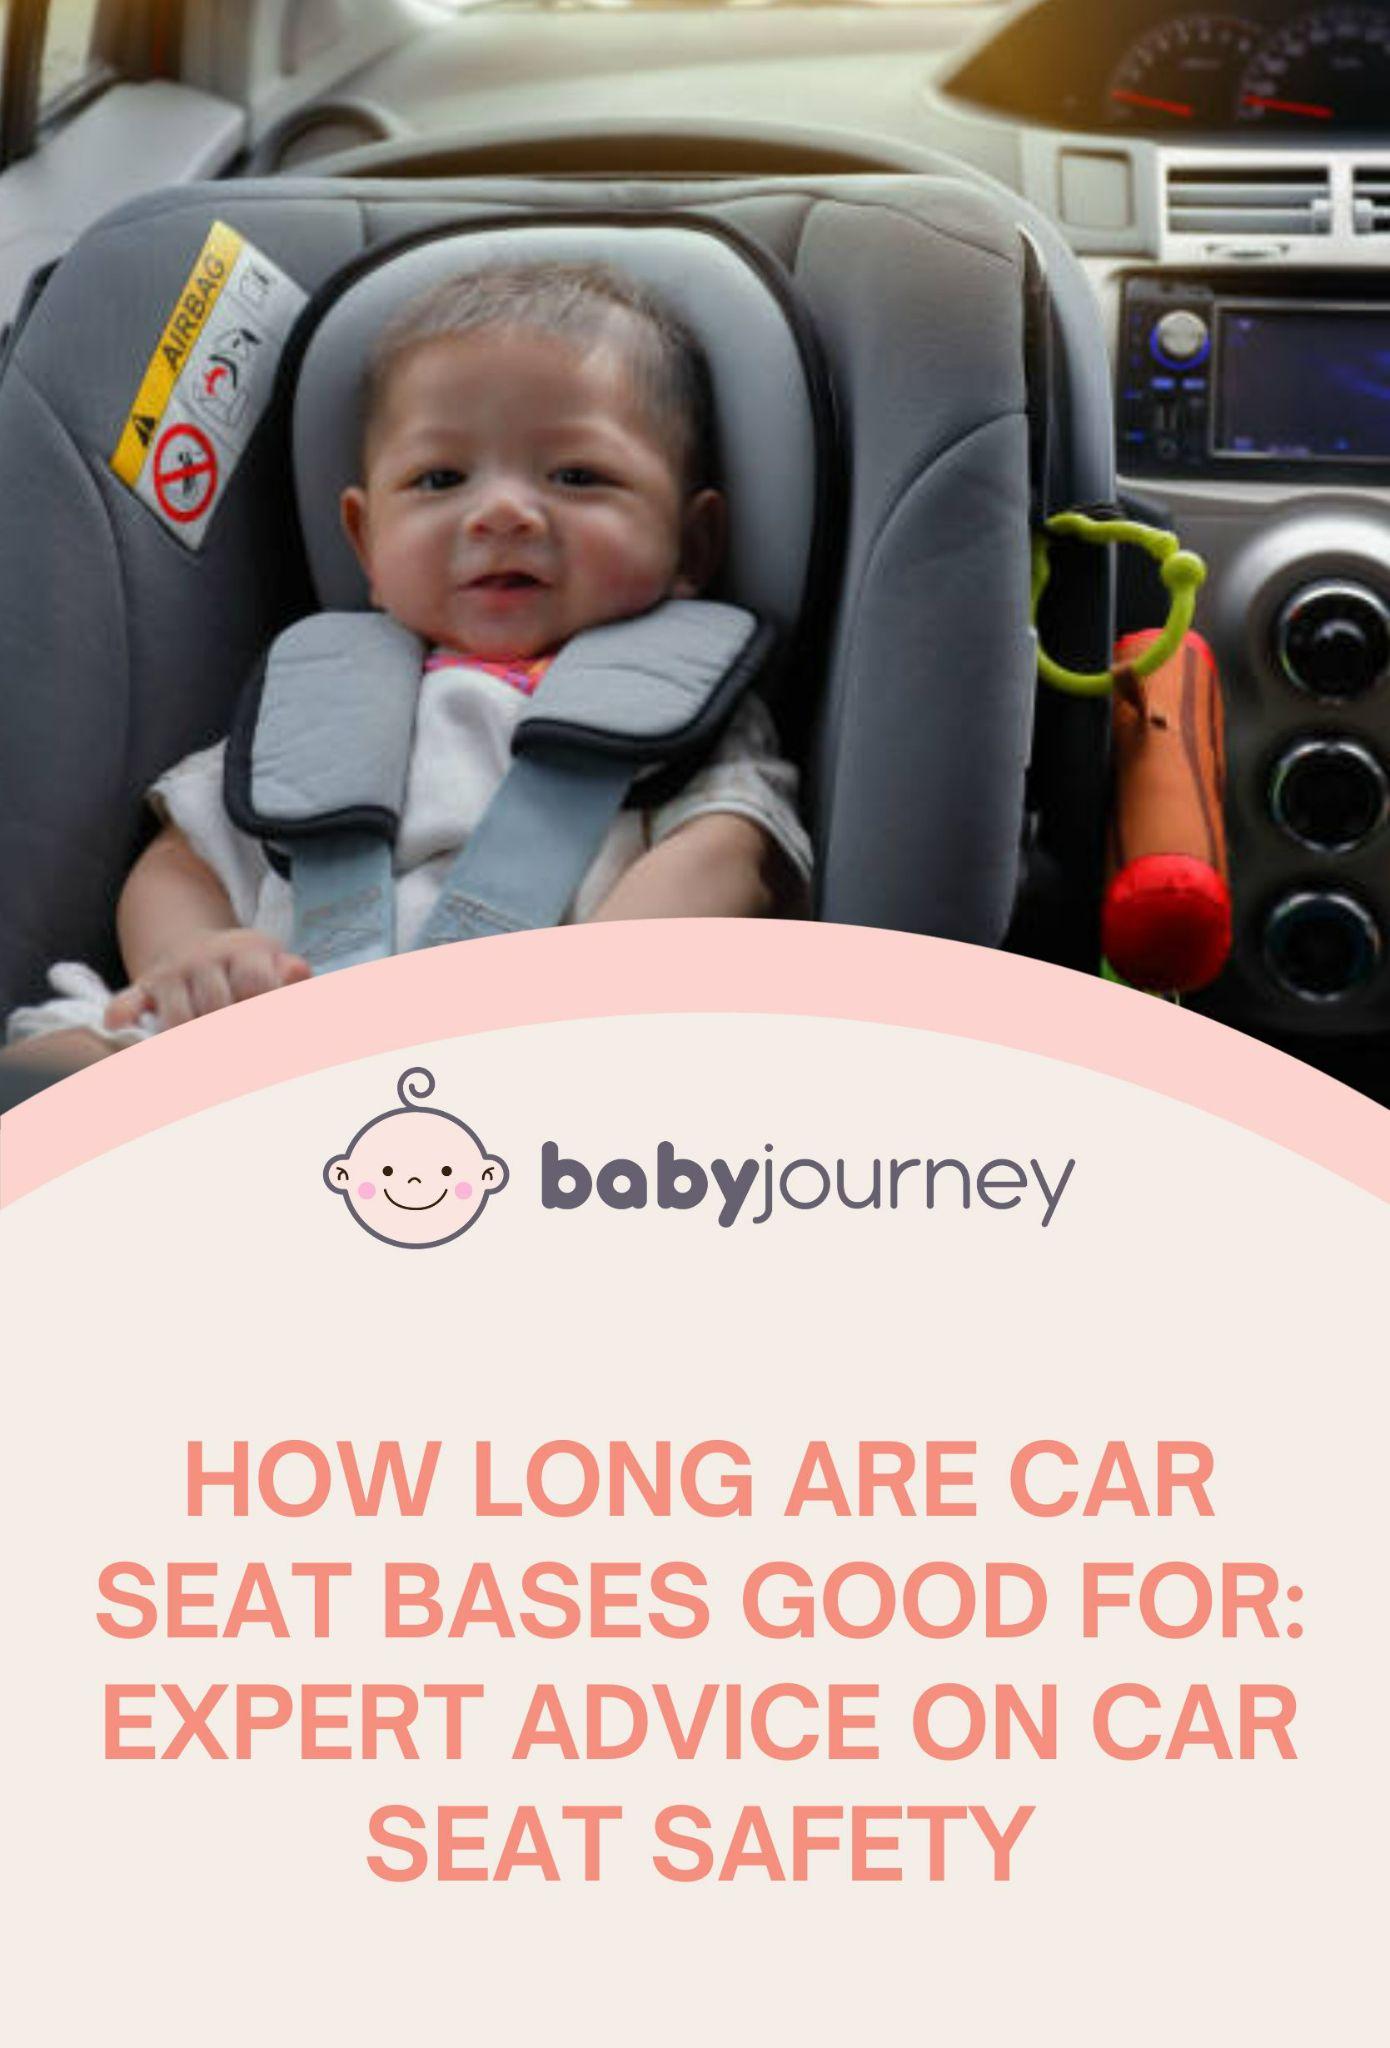 How Long Are Car Seat Bases Good For Pinterest - Baby Journey